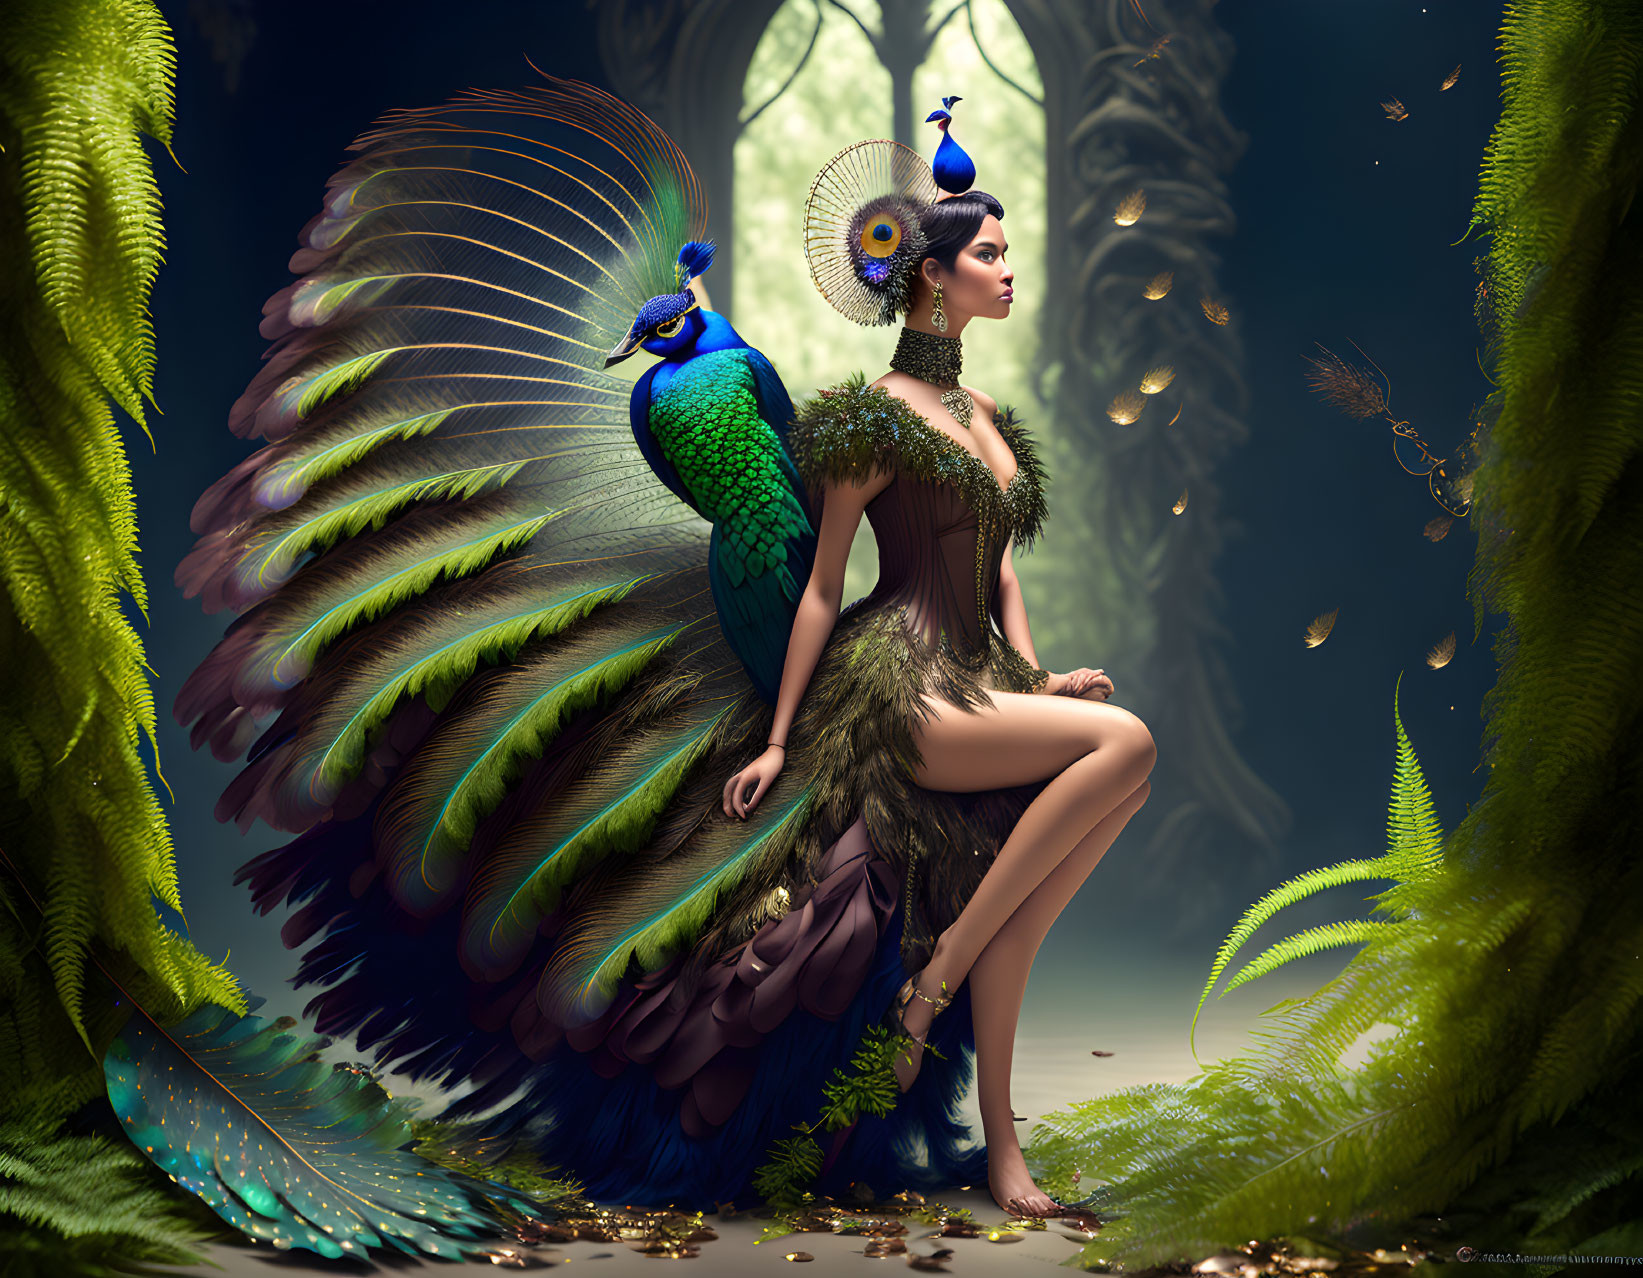 The girl with the peacock